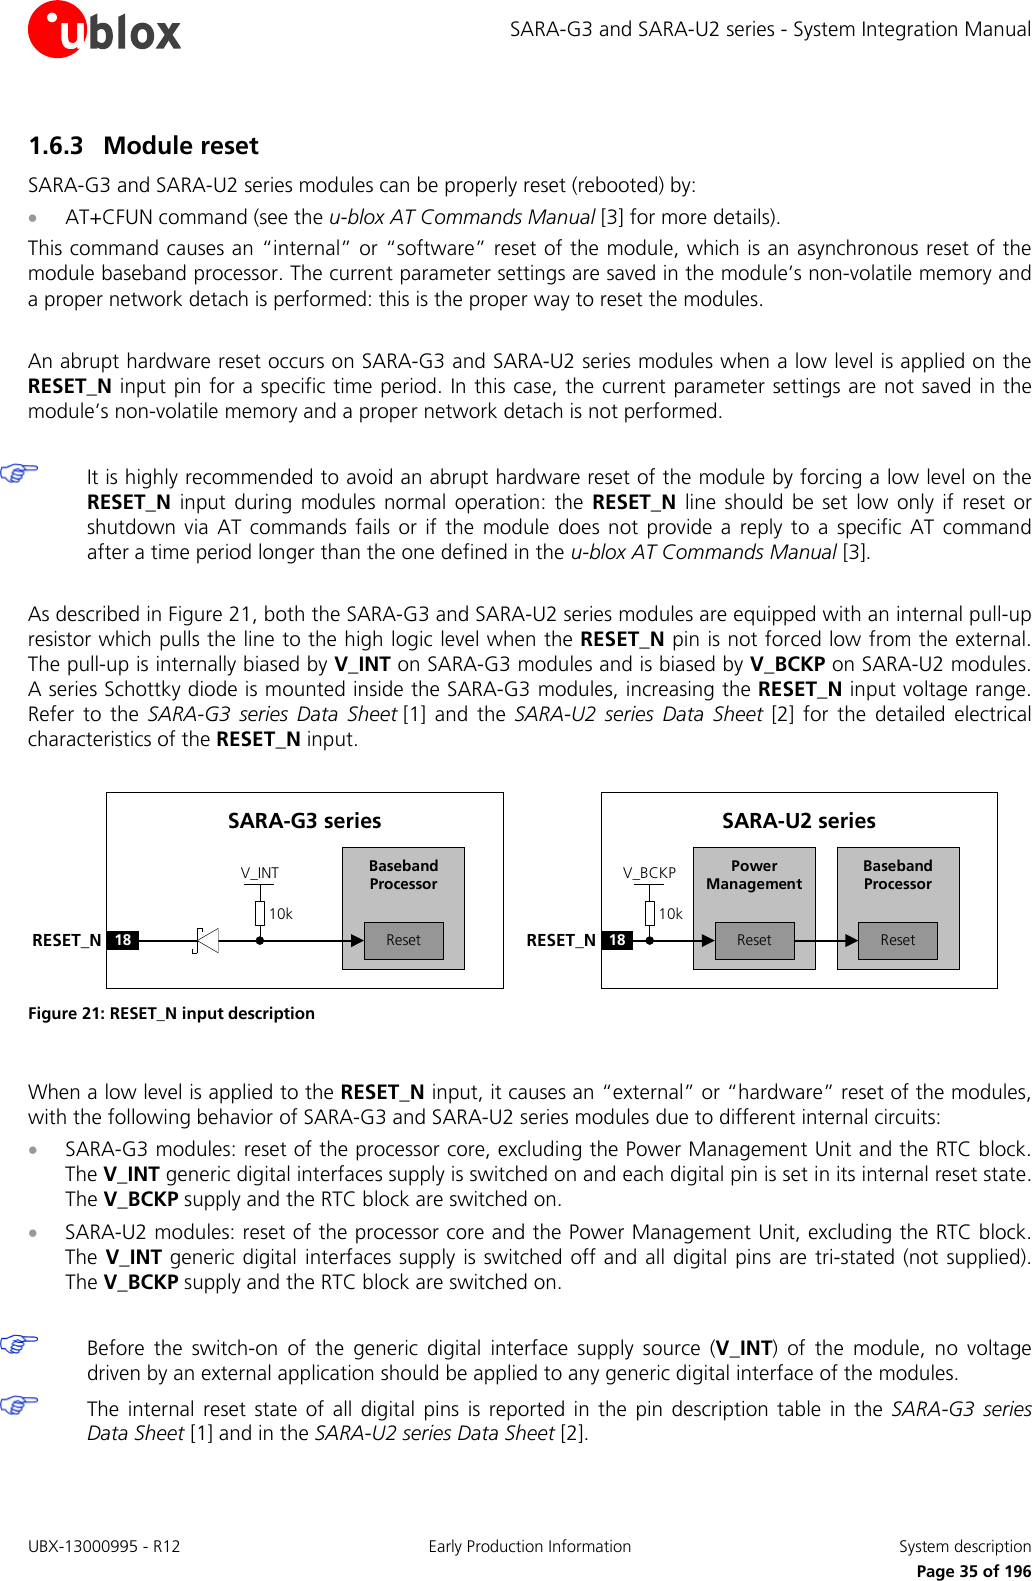 SARA-G3 and SARA-U2 series - System Integration Manual 1.6.3 Module reset SARA-G3 and SARA-U2 series modules can be properly reset (rebooted) by: • AT+CFUN command (see the u-blox AT Commands Manual [3] for more details). This command causes an “internal” or “software” reset of the module, which is an asynchronous reset of the module baseband processor. The current parameter settings are saved in the module’s non-volatile memory and a proper network detach is performed: this is the proper way to reset the modules.  An abrupt hardware reset occurs on SARA-G3 and SARA-U2 series modules when a low level is applied on the RESET_N input pin for a specific time period. In this case, the current parameter settings are not saved in the module’s non-volatile memory and a proper network detach is not performed.   It is highly recommended to avoid an abrupt hardware reset of the module by forcing a low level on the RESET_N input during modules normal operation: the RESET_N line should be set low only if reset or shutdown via AT commands fails or if the module does not provide a reply to a specific AT command after a time period longer than the one defined in the u-blox AT Commands Manual [3].  As described in Figure 21, both the SARA-G3 and SARA-U2 series modules are equipped with an internal pull-up resistor which pulls the line to the high logic level when the RESET_N pin is not forced low from the external. The pull-up is internally biased by V_INT on SARA-G3 modules and is biased by V_BCKP on SARA-U2 modules. A series Schottky diode is mounted inside the SARA-G3 modules, increasing the RESET_N input voltage range. Refer to the  SARA-G3 series Data Sheet [1] and the SARA-U2 series Data Sheet [2] for the detailed electrical characteristics of the RESET_N input.  Baseband Processor18RESET_NSARA-U2 seriesResetPower ManagementReset10kV_BCKPBaseband Processor18RESET_NSARA-G3 seriesReset10kV_INT Figure 21: RESET_N input description  When a low level is applied to the RESET_N input, it causes an “external” or “hardware” reset of the modules, with the following behavior of SARA-G3 and SARA-U2 series modules due to different internal circuits: • SARA-G3 modules: reset of the processor core, excluding the Power Management Unit and the RTC block. The V_INT generic digital interfaces supply is switched on and each digital pin is set in its internal reset state. The V_BCKP supply and the RTC block are switched on. • SARA-U2 modules: reset of the processor core and the Power Management Unit, excluding the RTC block. The V_INT generic digital interfaces supply is switched off and all digital pins are tri-stated (not supplied). The V_BCKP supply and the RTC block are switched on.   Before the switch-on of the generic digital interface supply source (V_INT) of the module, no voltage driven by an external application should be applied to any generic digital interface of the modules.  The internal reset state of all digital pins is reported in the pin description table in the SARA-G3 series Data Sheet [1] and in the SARA-U2 series Data Sheet [2].  UBX-13000995 - R12 Early Production Information System description     Page 35 of 196 